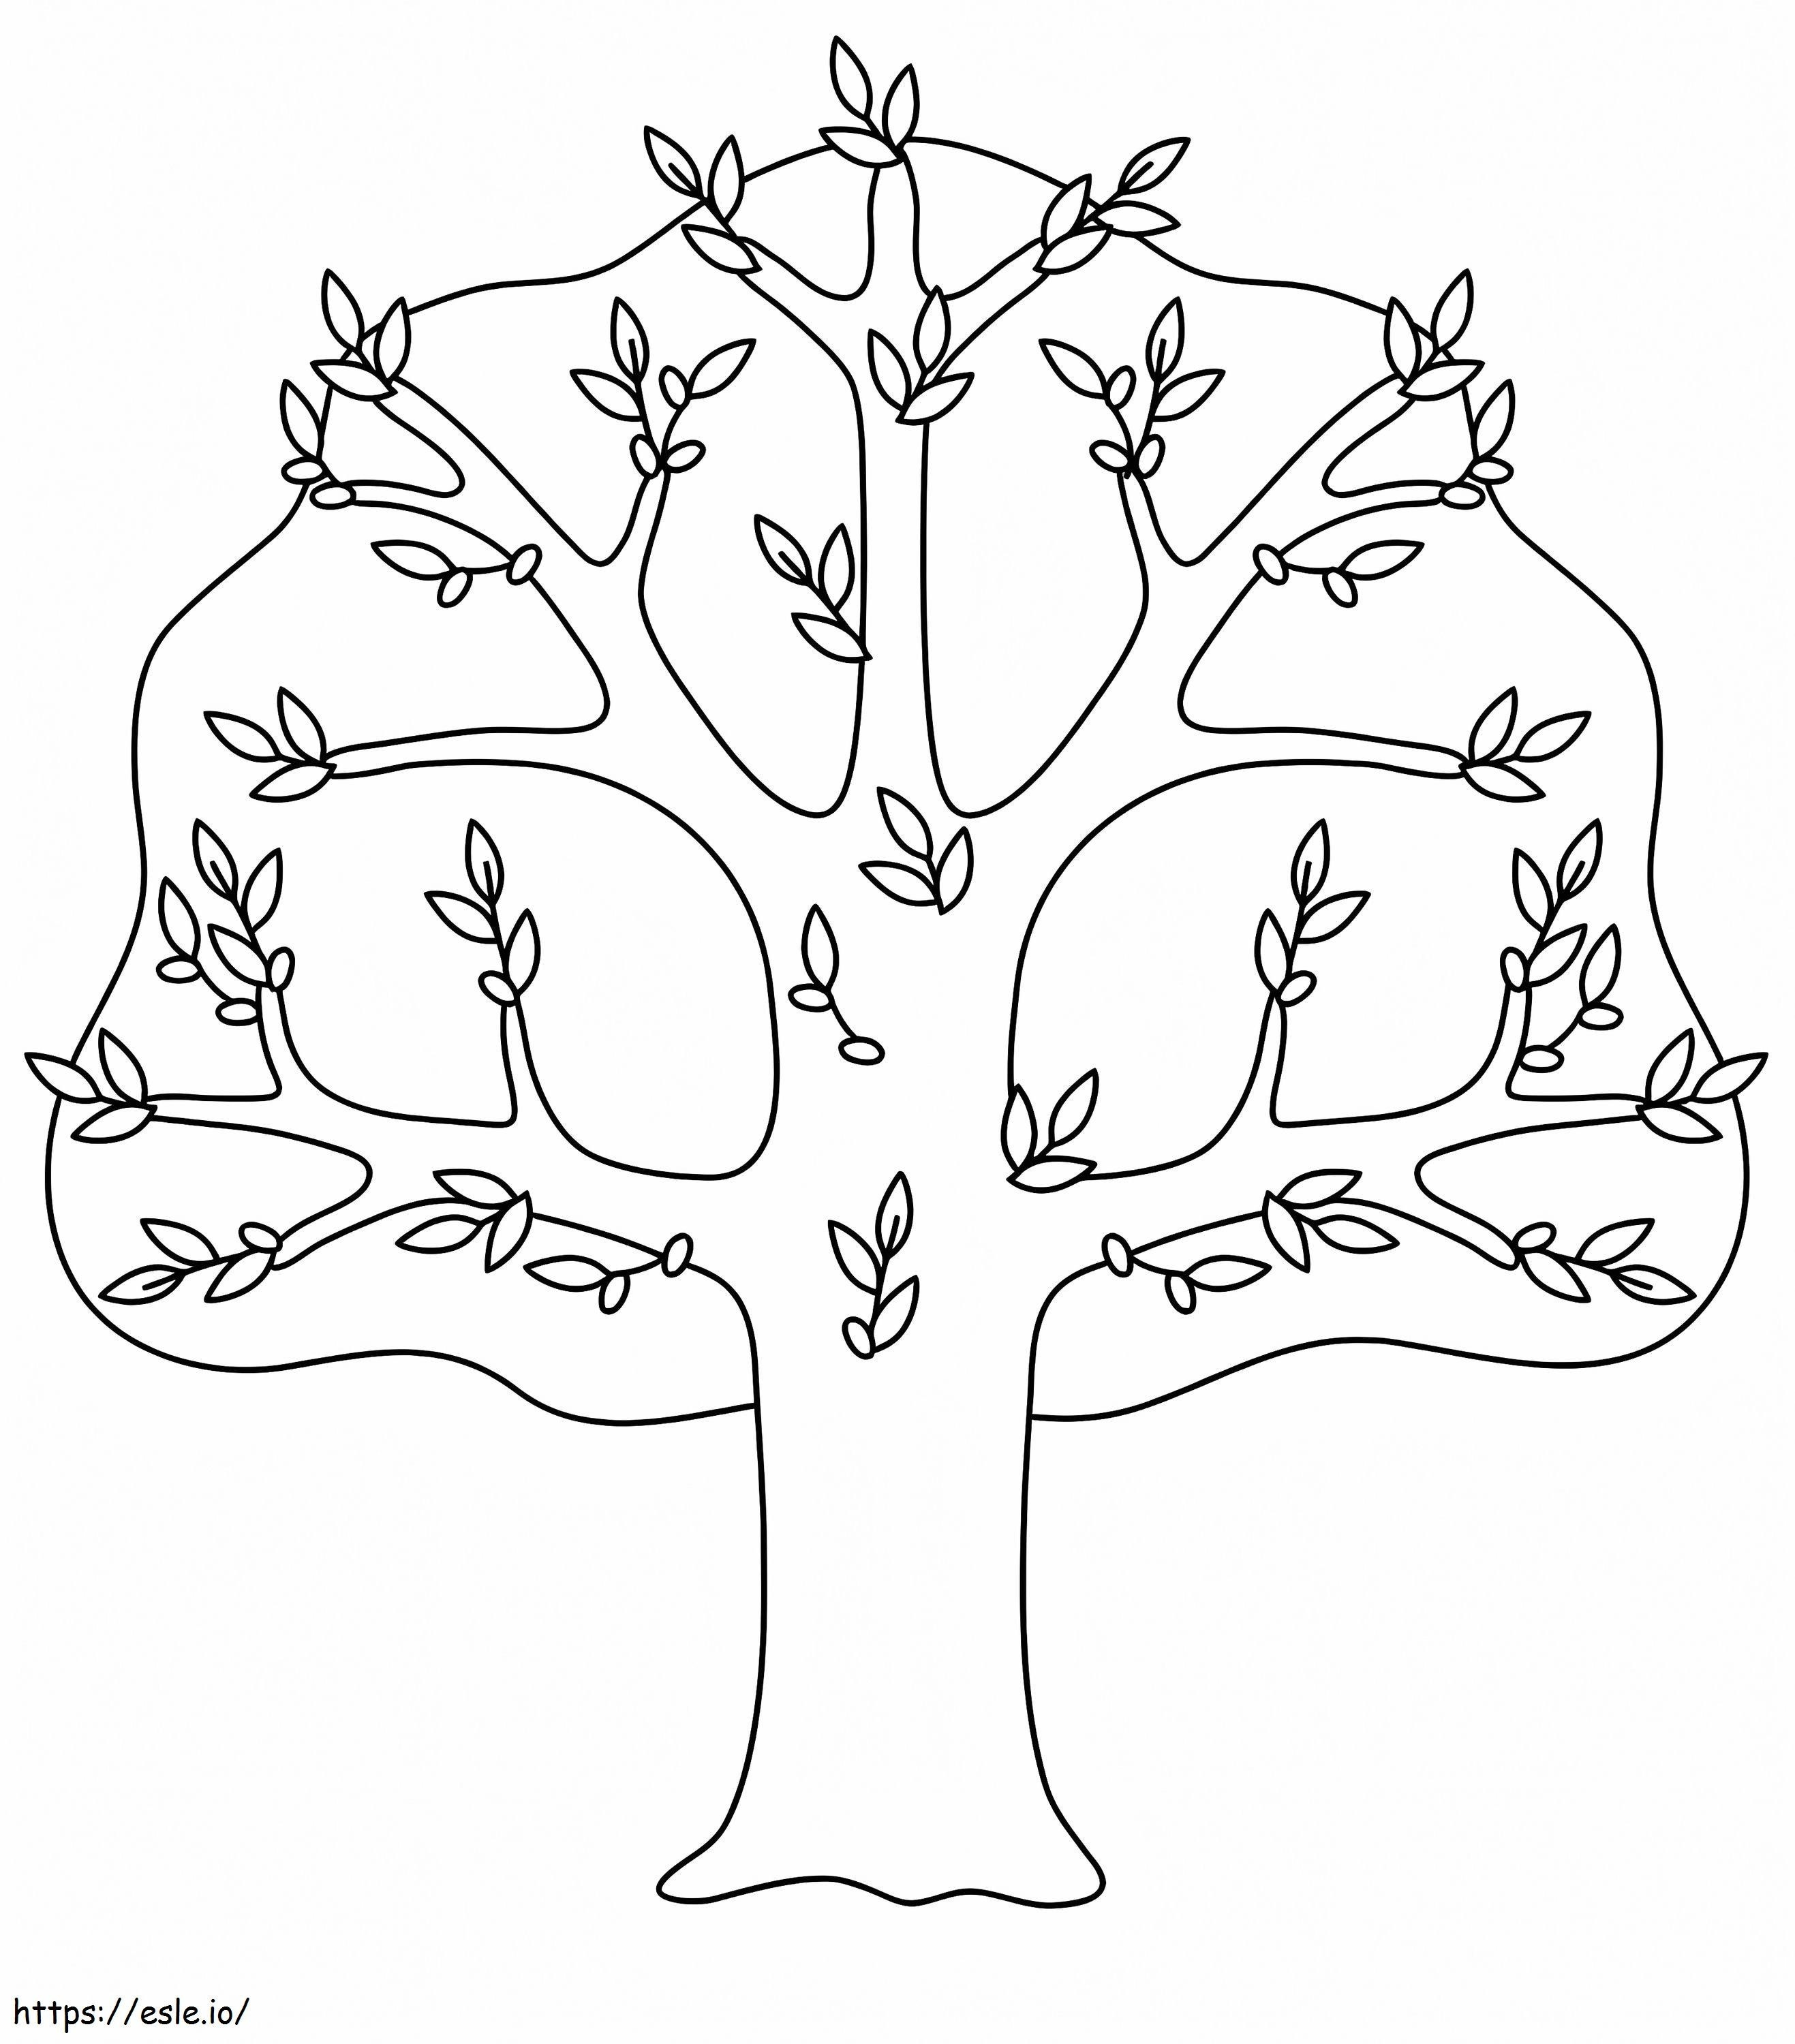 Spring Tree 2 coloring page